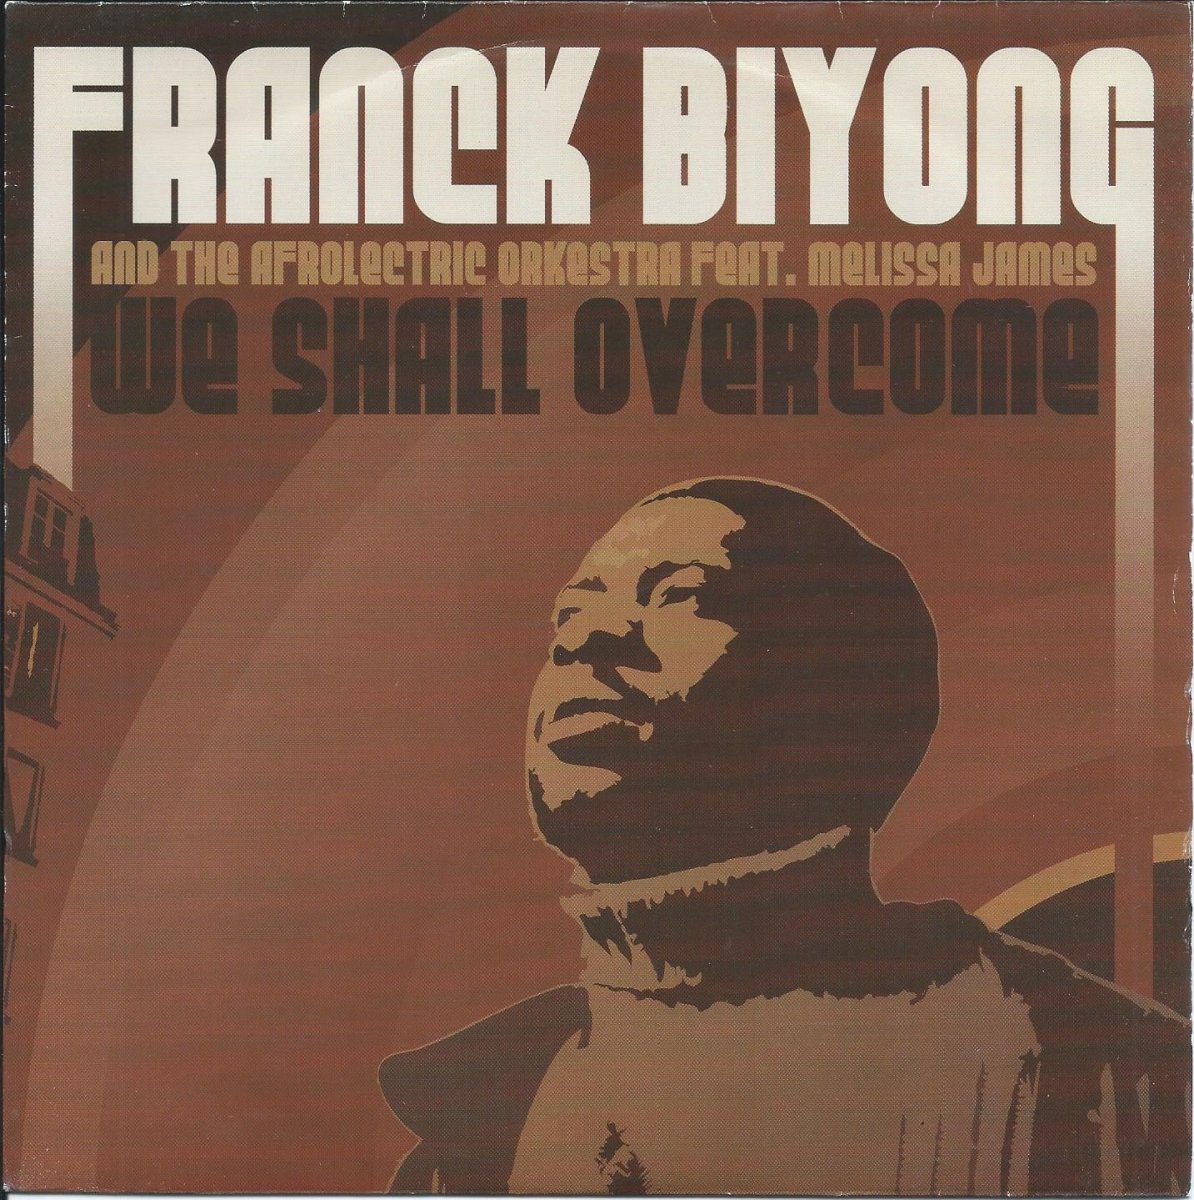 FRANCK BIYONG AND THE AFROLECTRIC ORKESTRA FEAT. MELISSA JAMES / WE SHALL OVERCOME (7